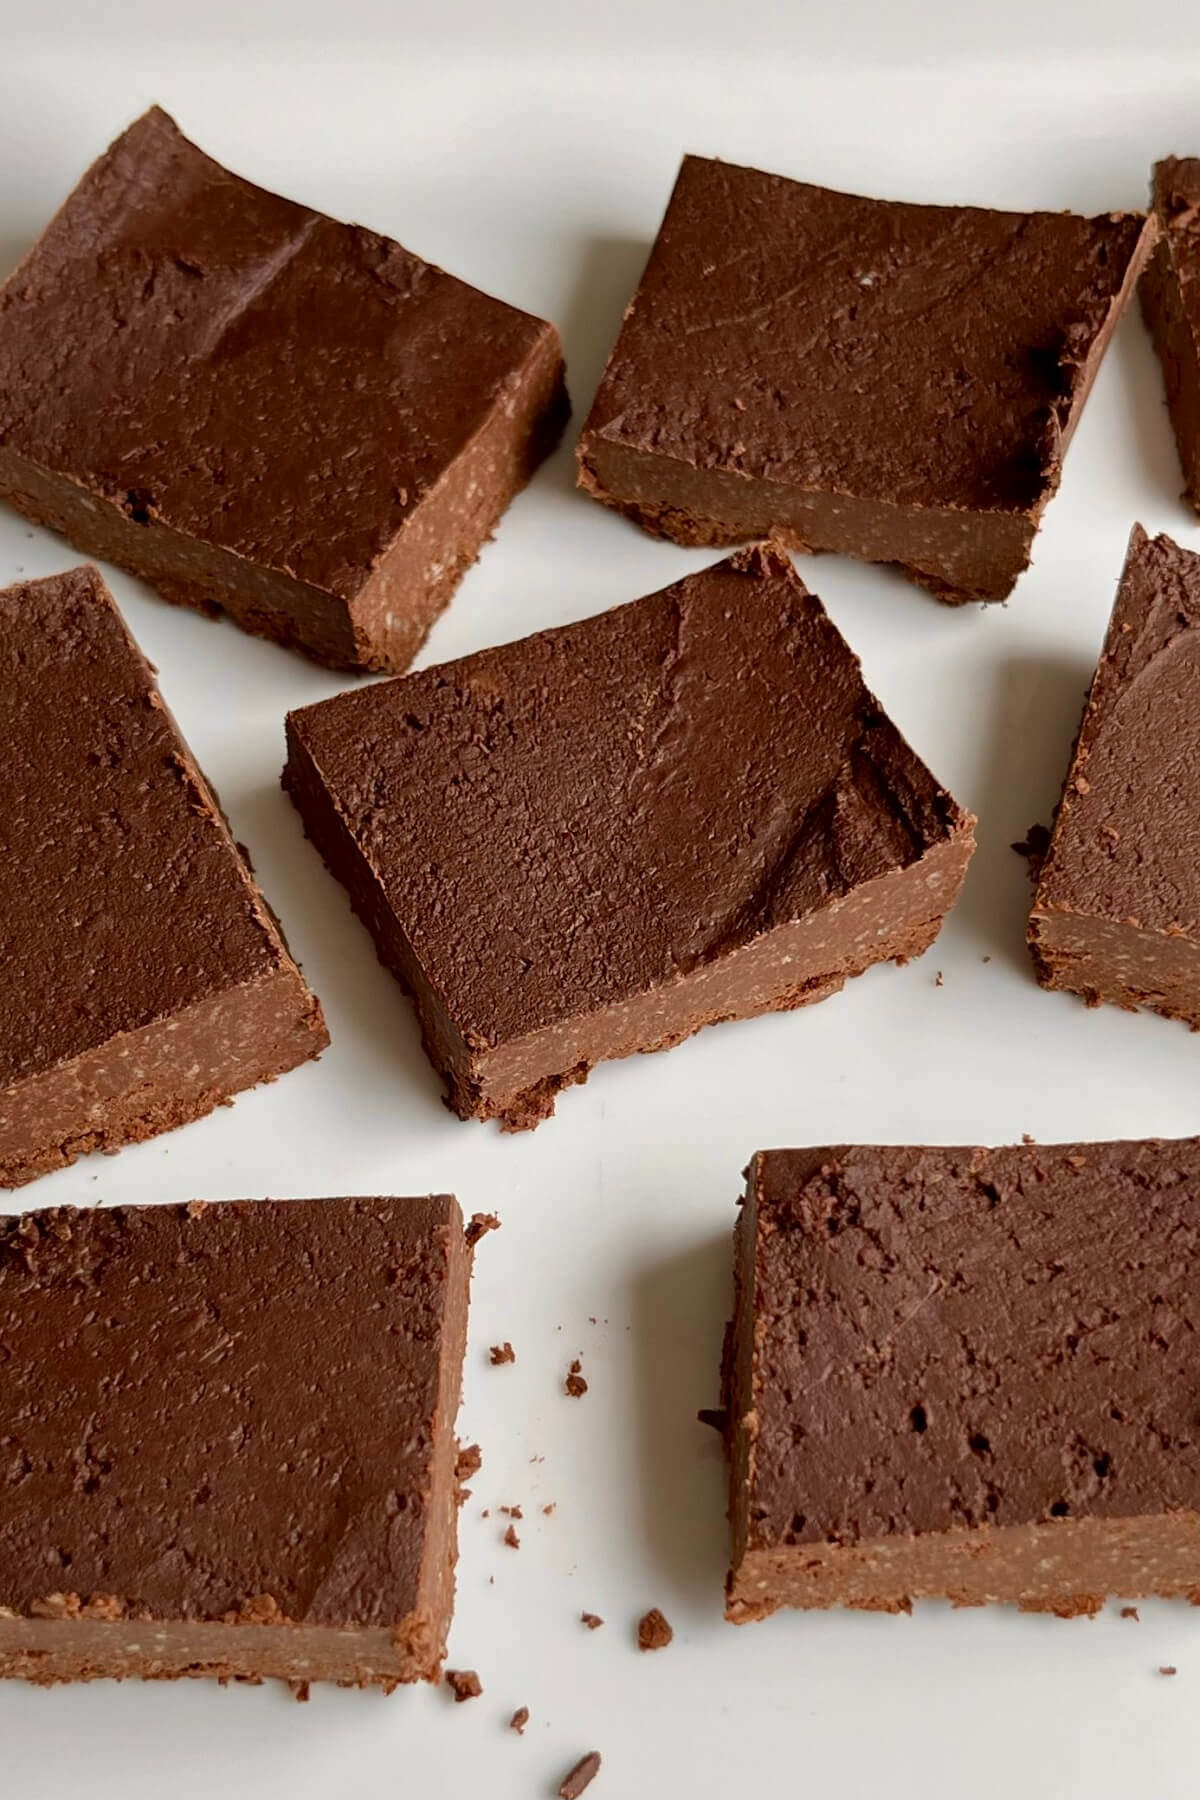 Fudge made from chickpeas and dark chocolate on a white plate.